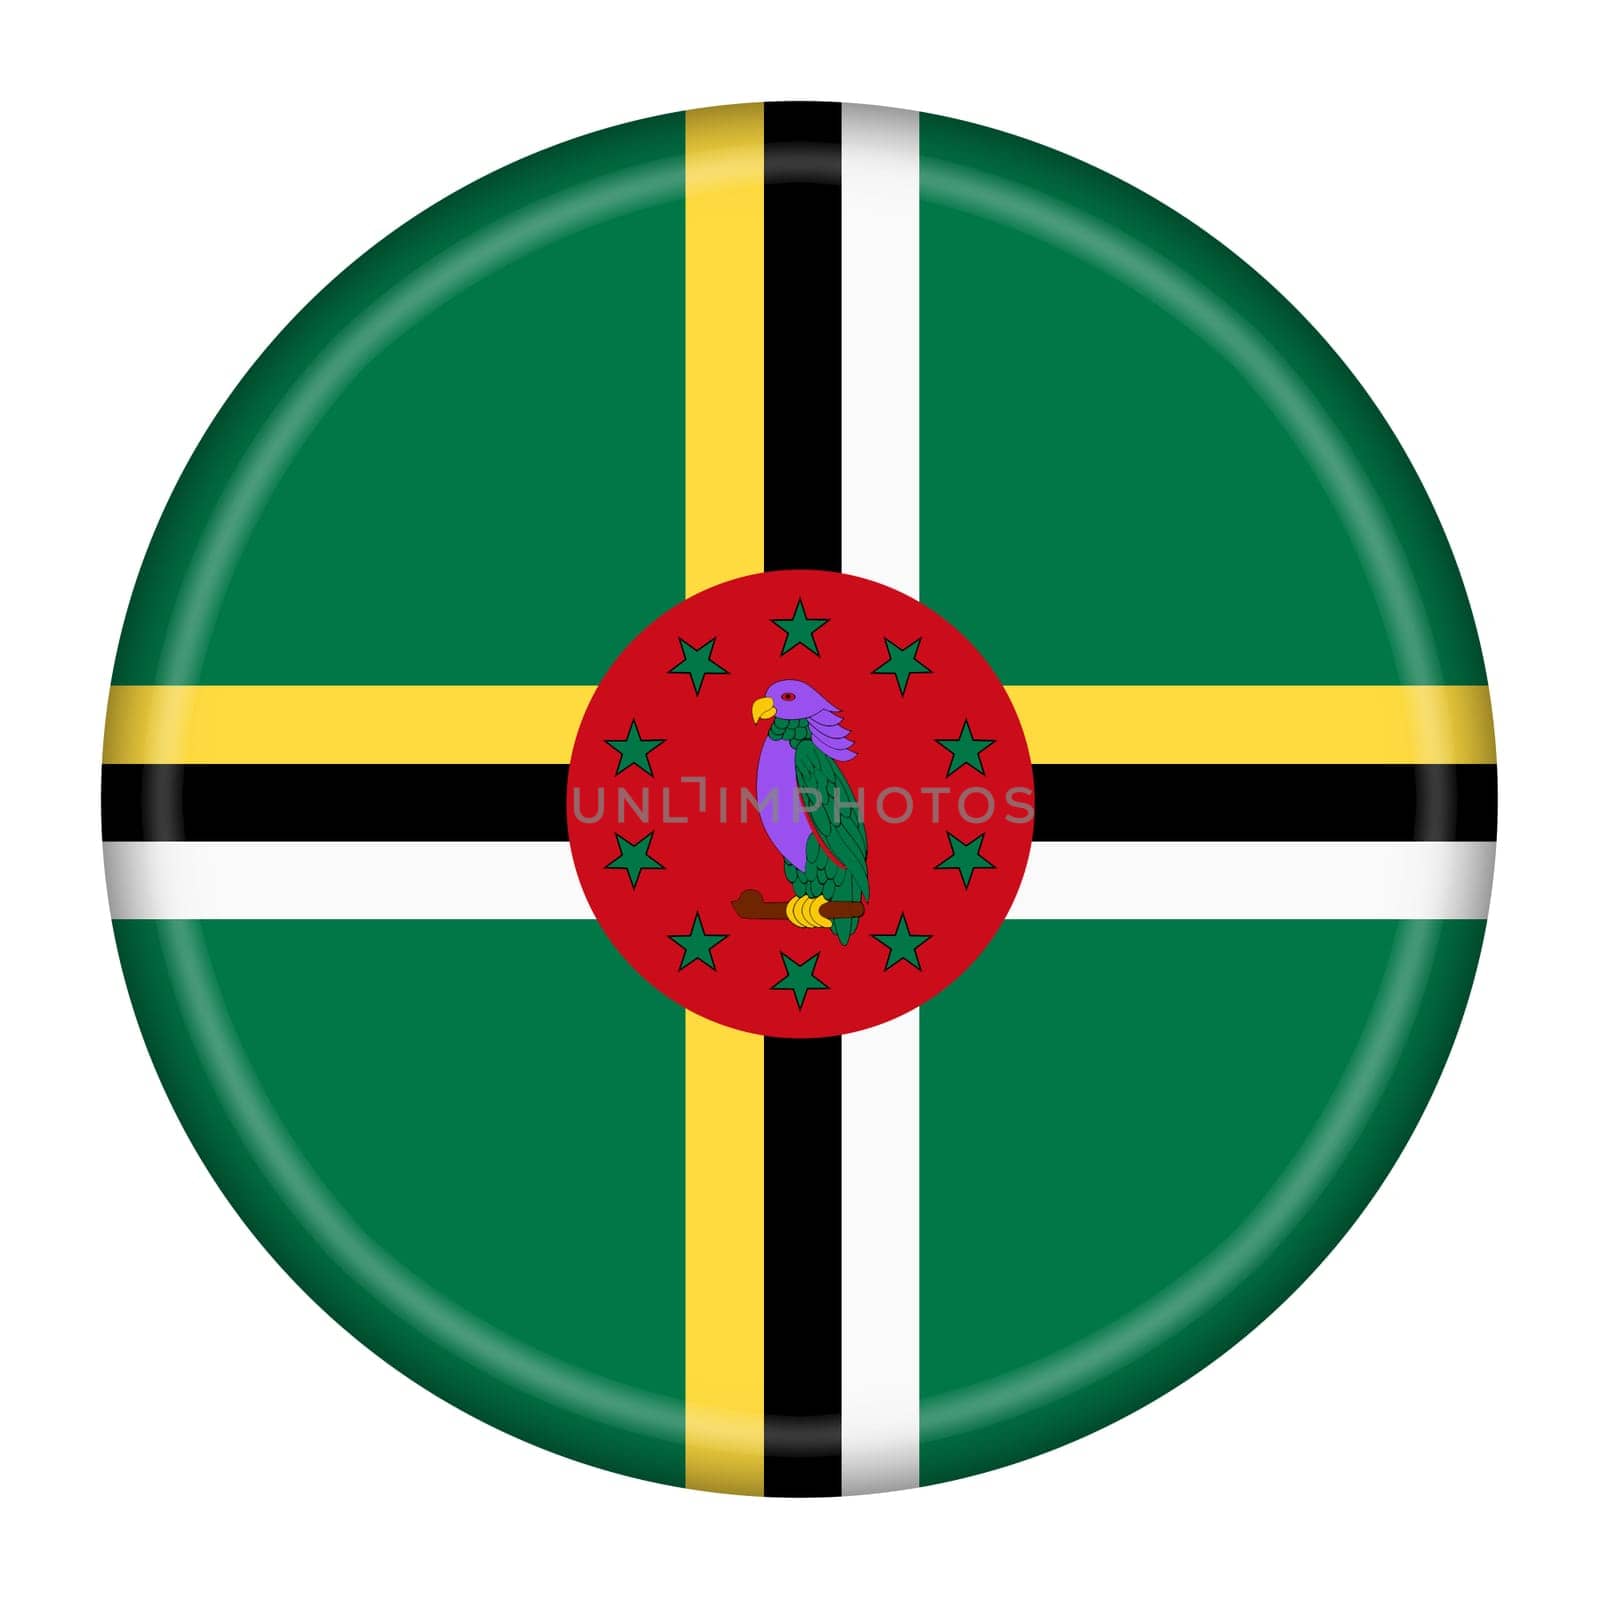 Dominica flag button 3d illustration with clipping path by VivacityImages